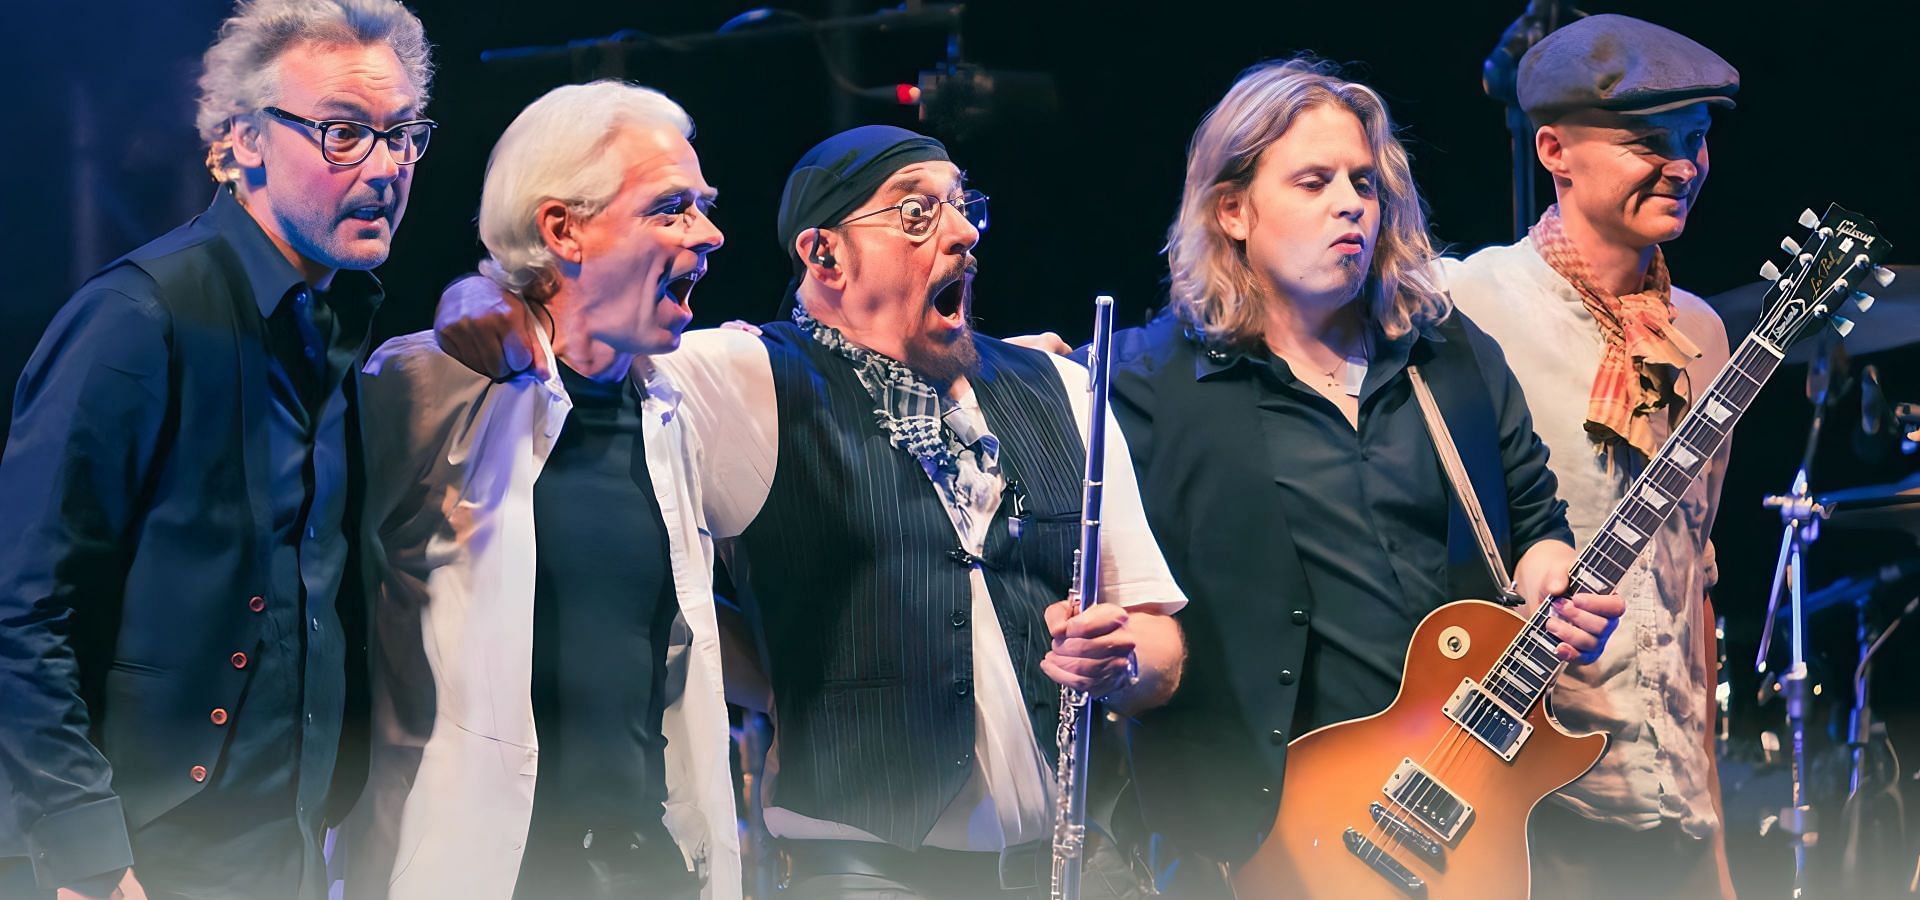 Jethro Tull Tour 2023 Tickets, dates, venues and more